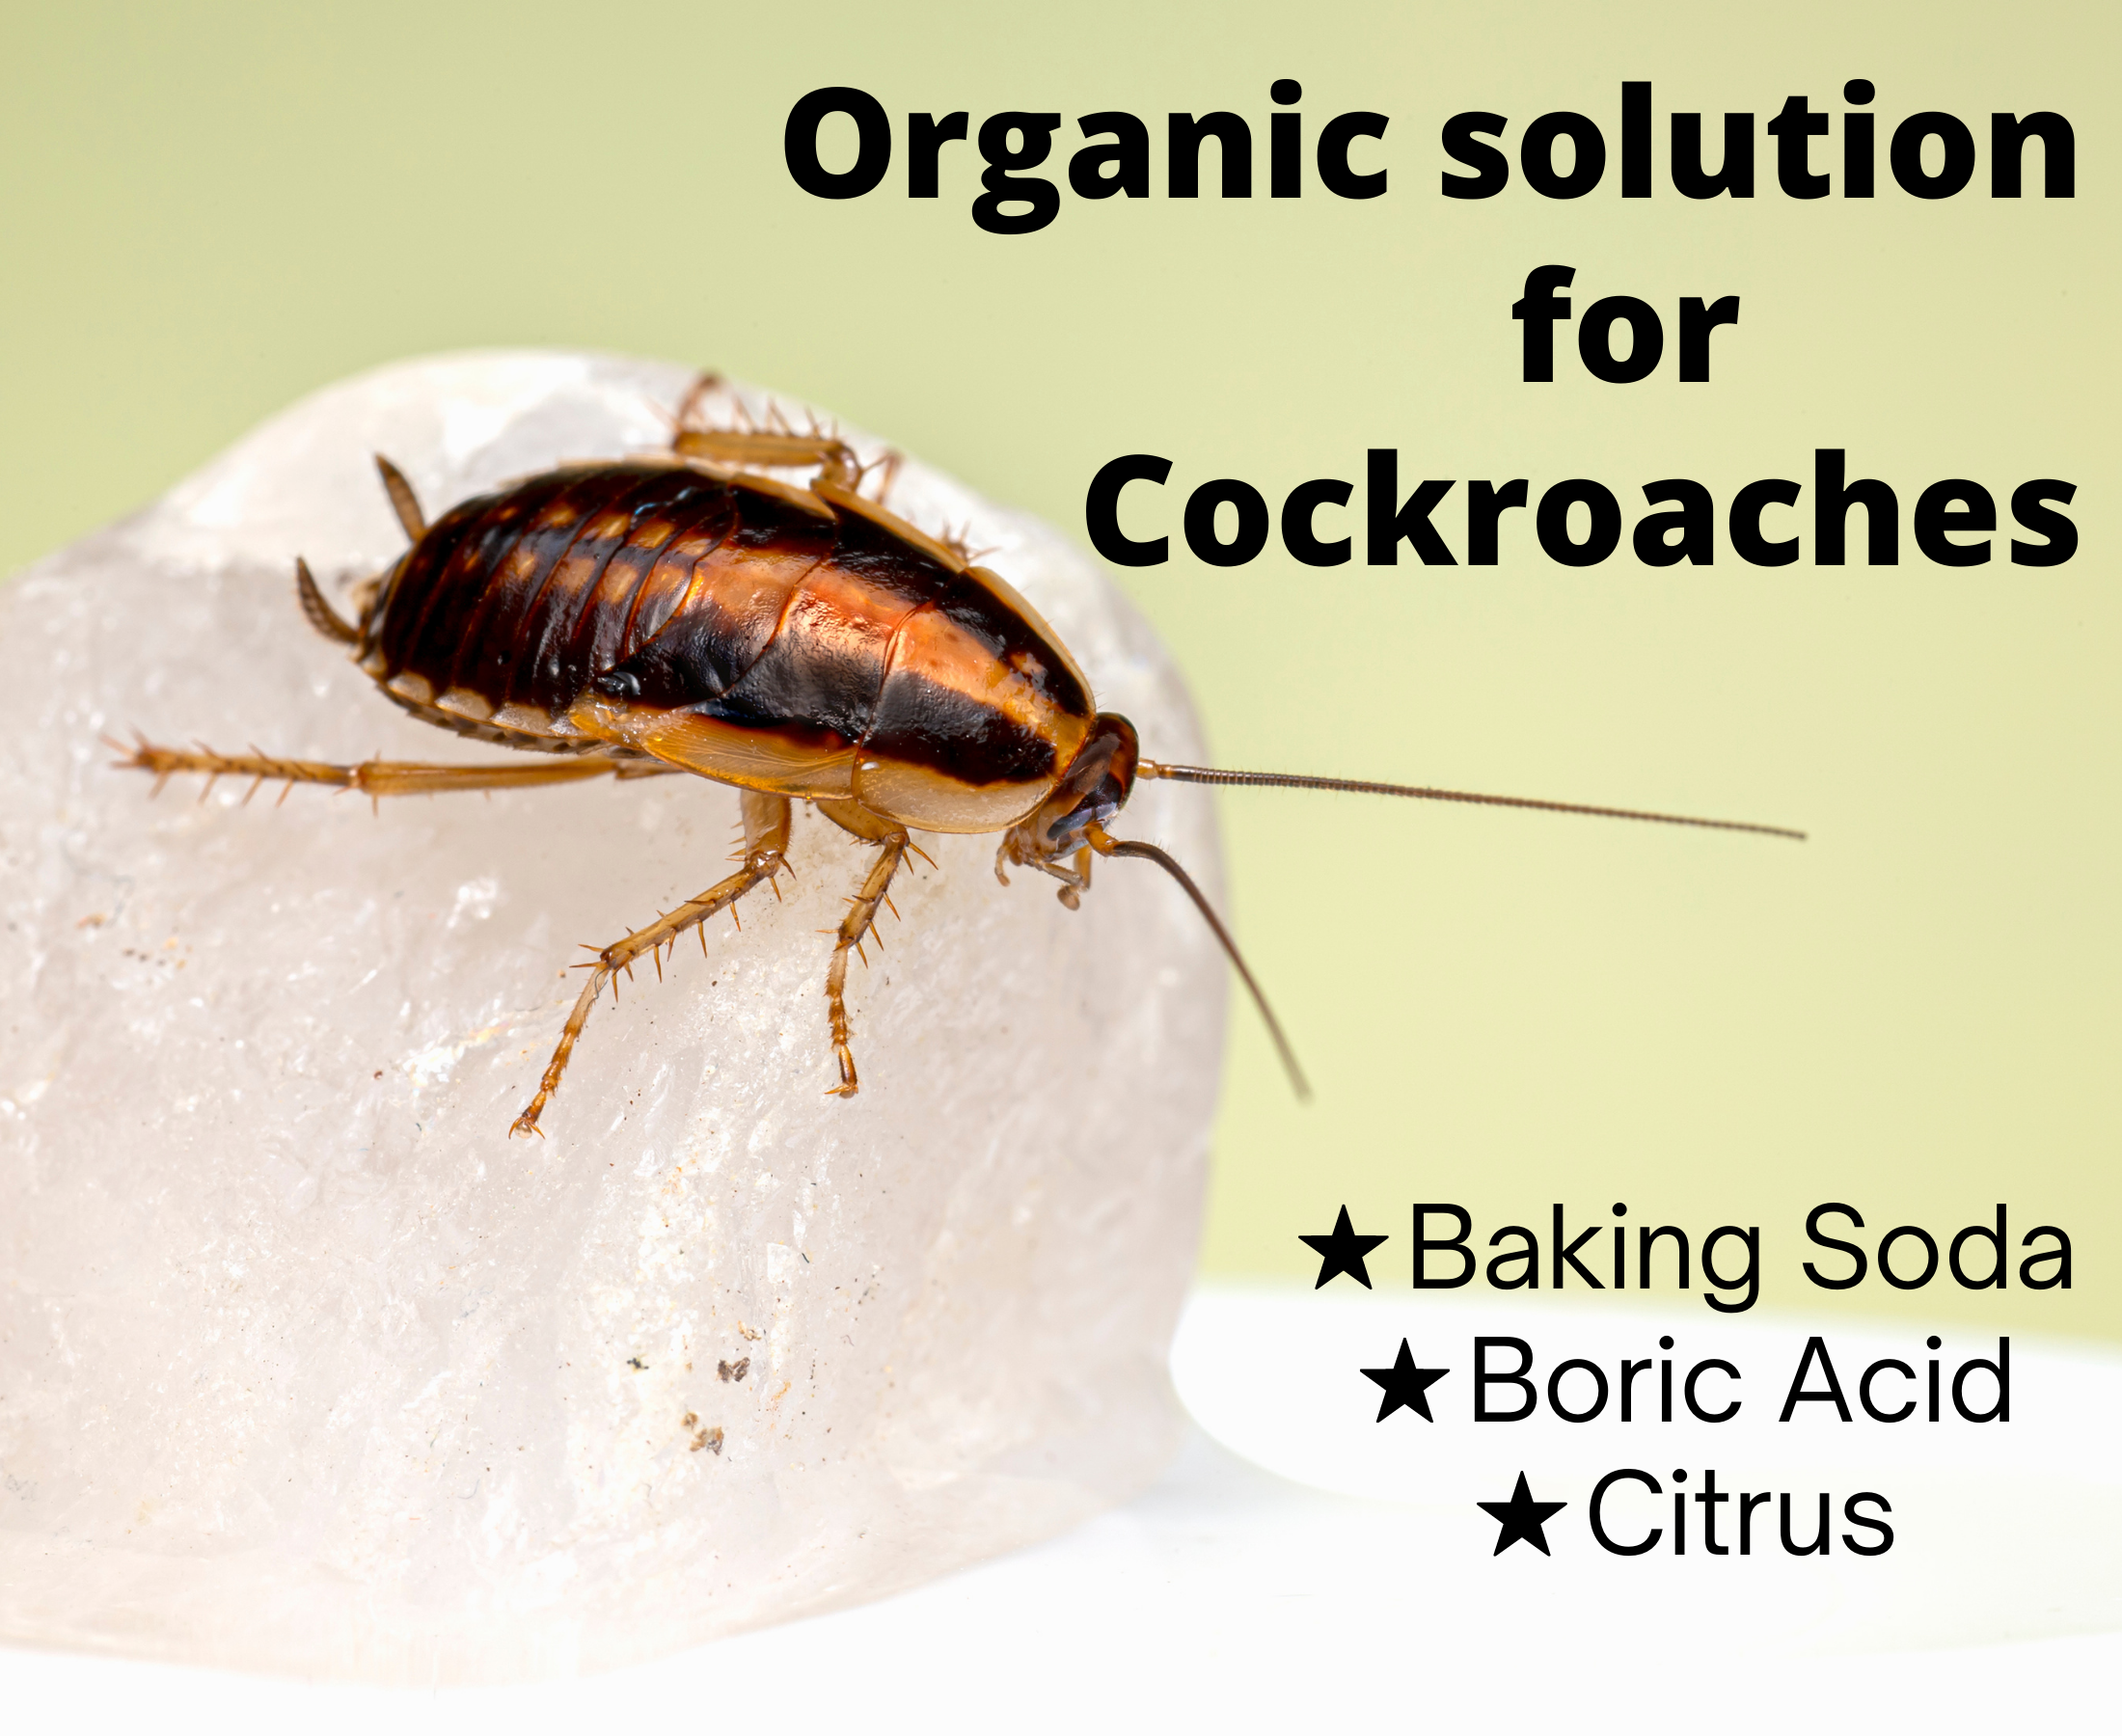 How to make the best cockroach gel at home?